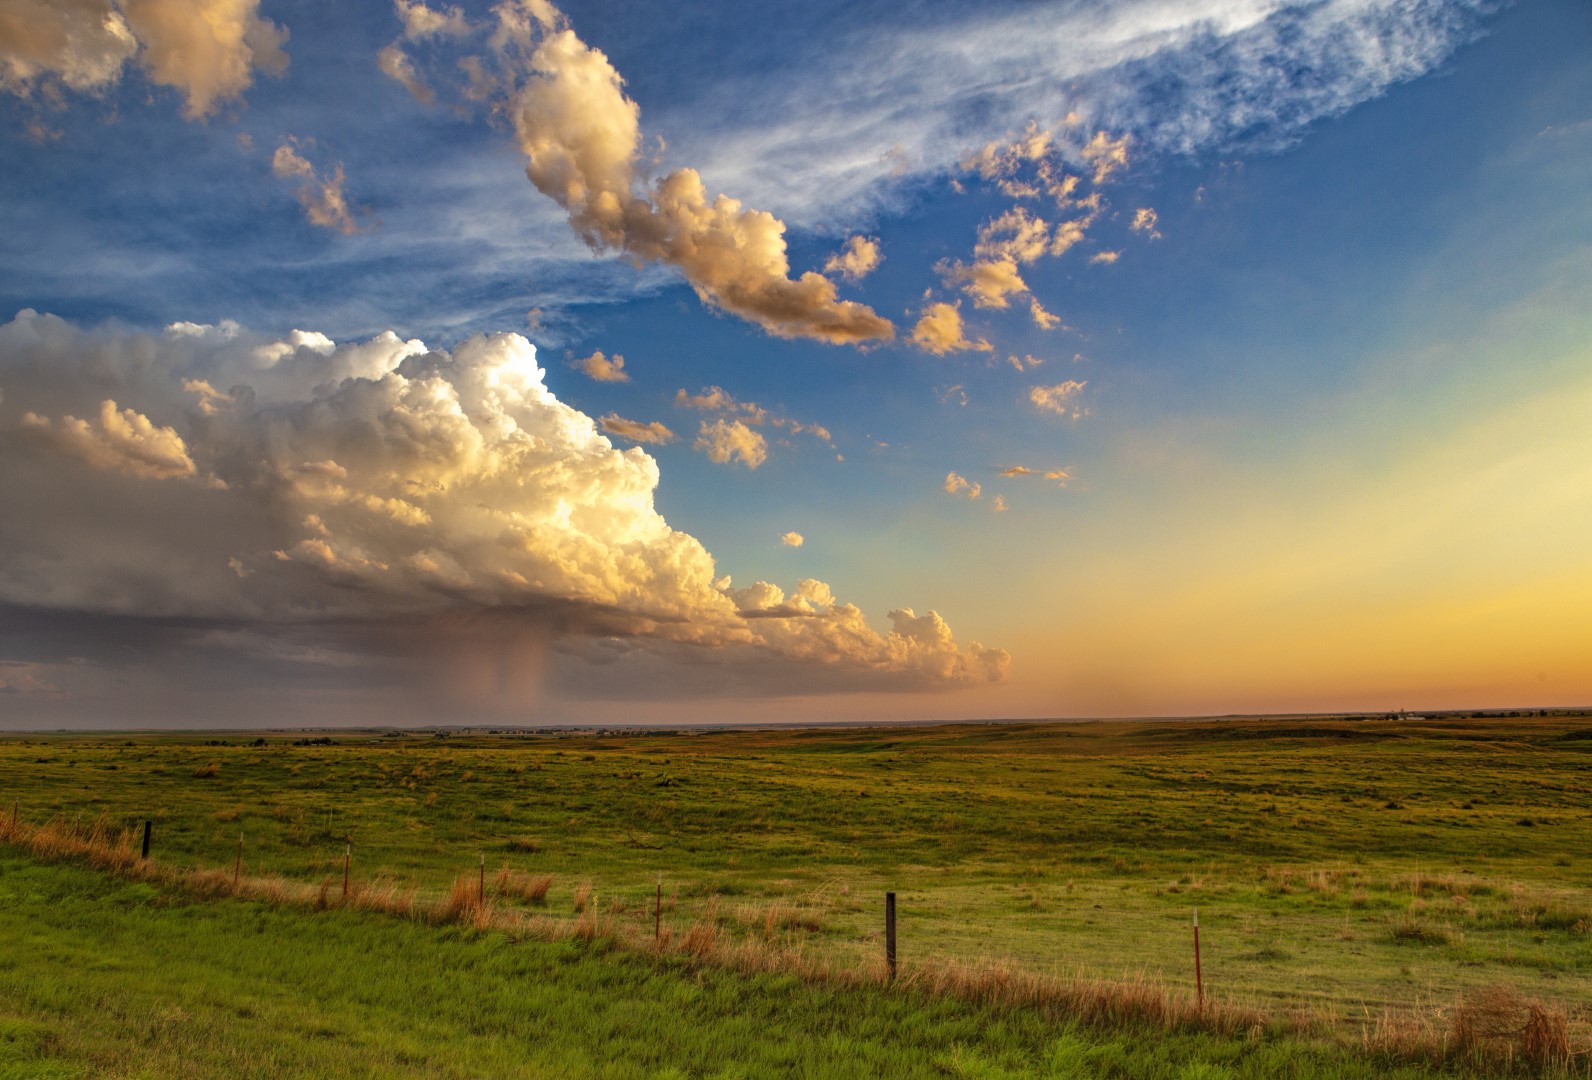 The final remnants of a dying storm move across the Oklahoma prairie as the sun sets.